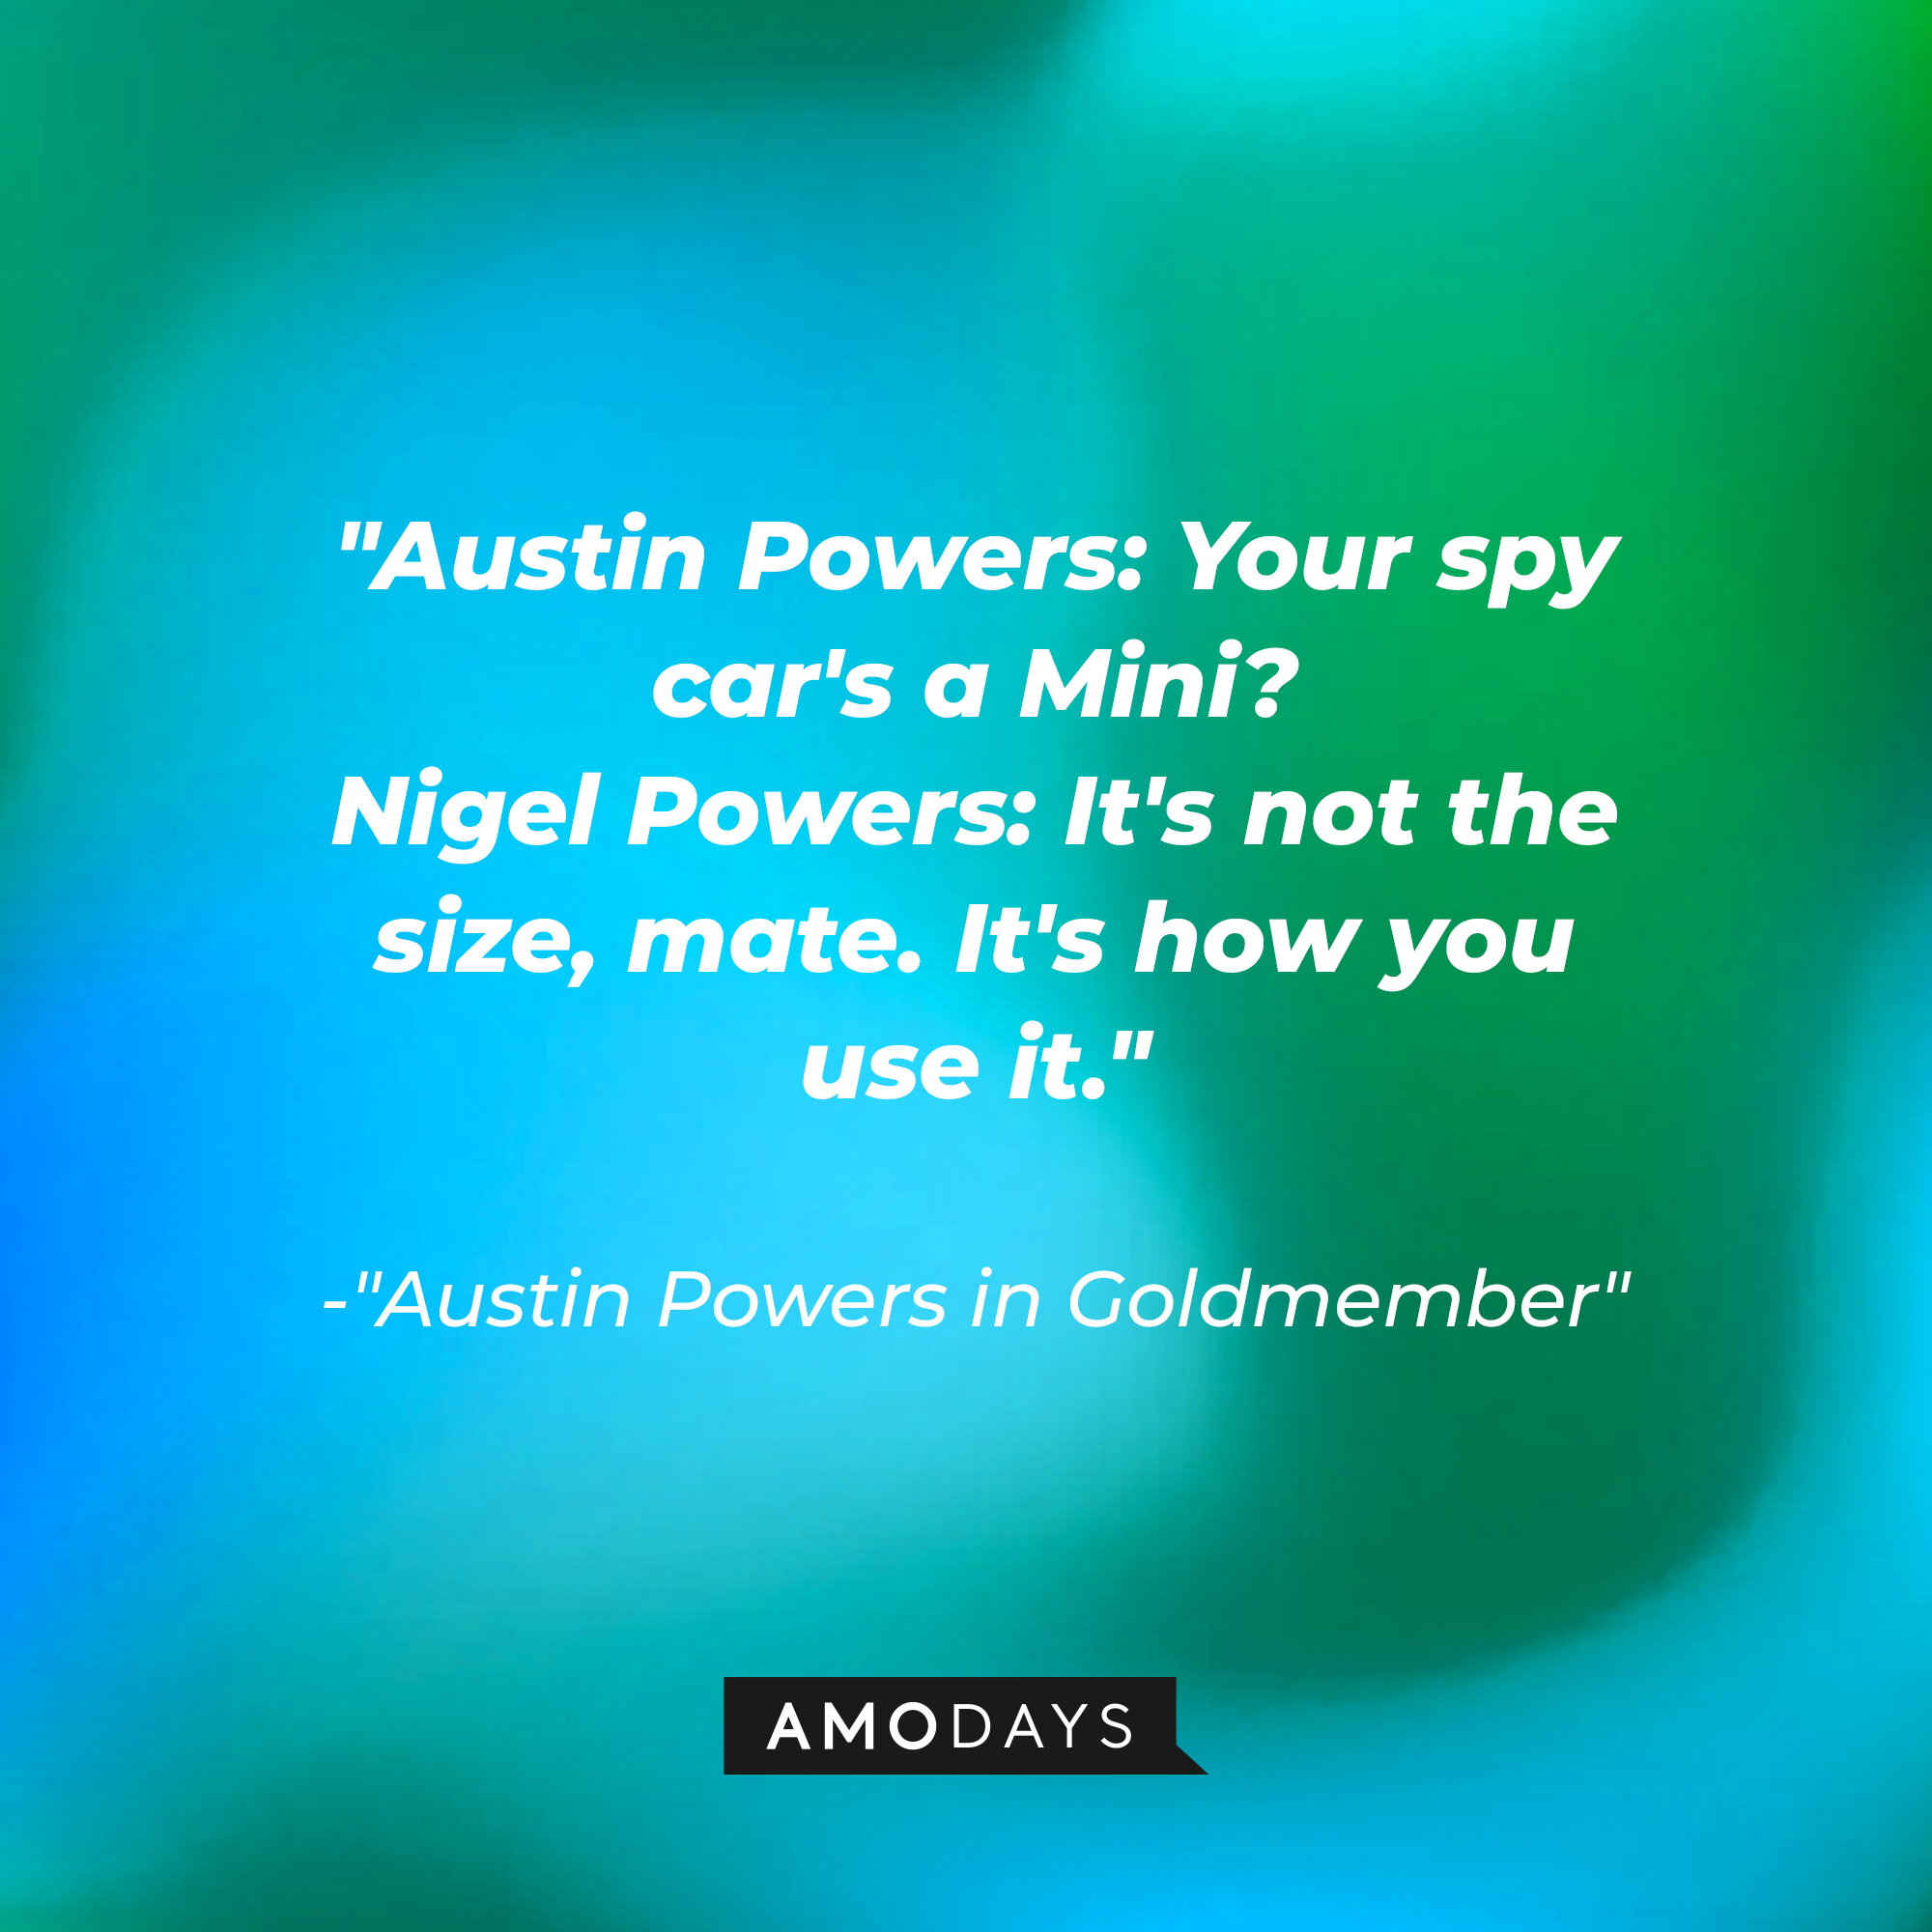 Dialogue from "Austin Powers in Goldmember": "Austin Powers: Your spy car's a Mini? Nigel Powers: It's not the size, mate. It's how you use it." | Source: Amodays